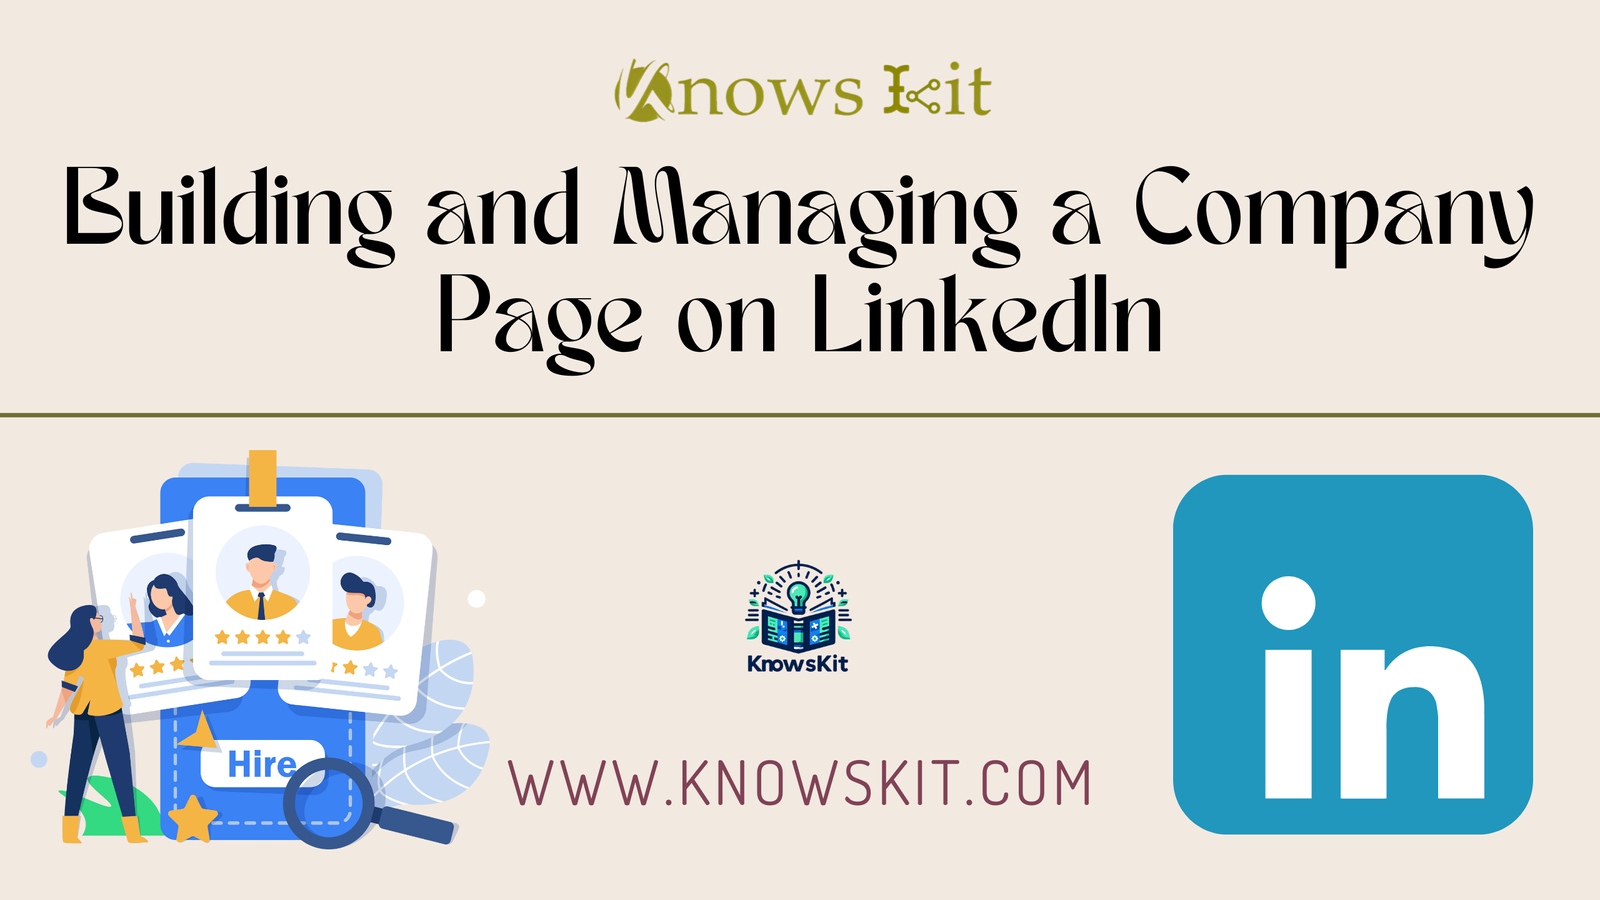 Building and Managing a Company Page on LinkedIn